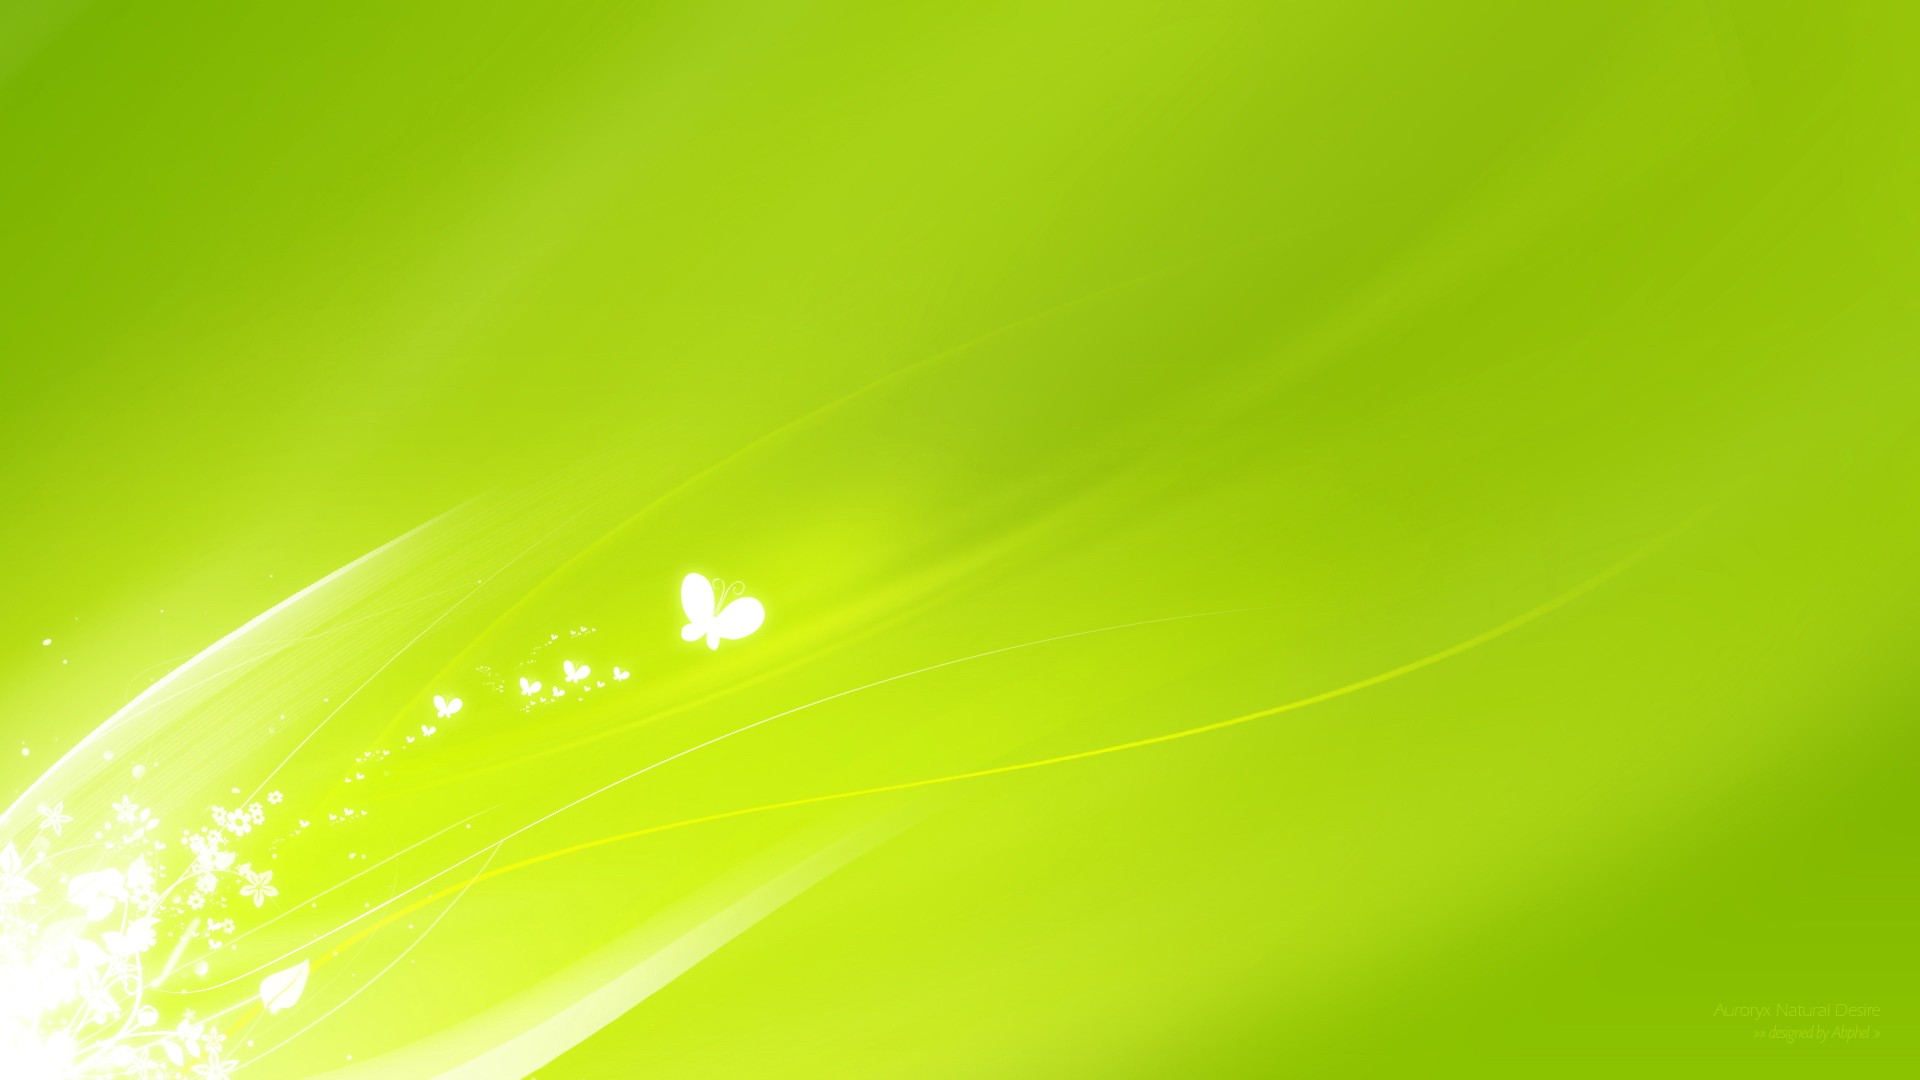 Lime Green Background Wallpaper HD With Resolution 1920X1080 pixel. You can make this wallpaper for your Desktop Computer Backgrounds, Mac Wallpapers, Android Lock screen or iPhone Screensavers